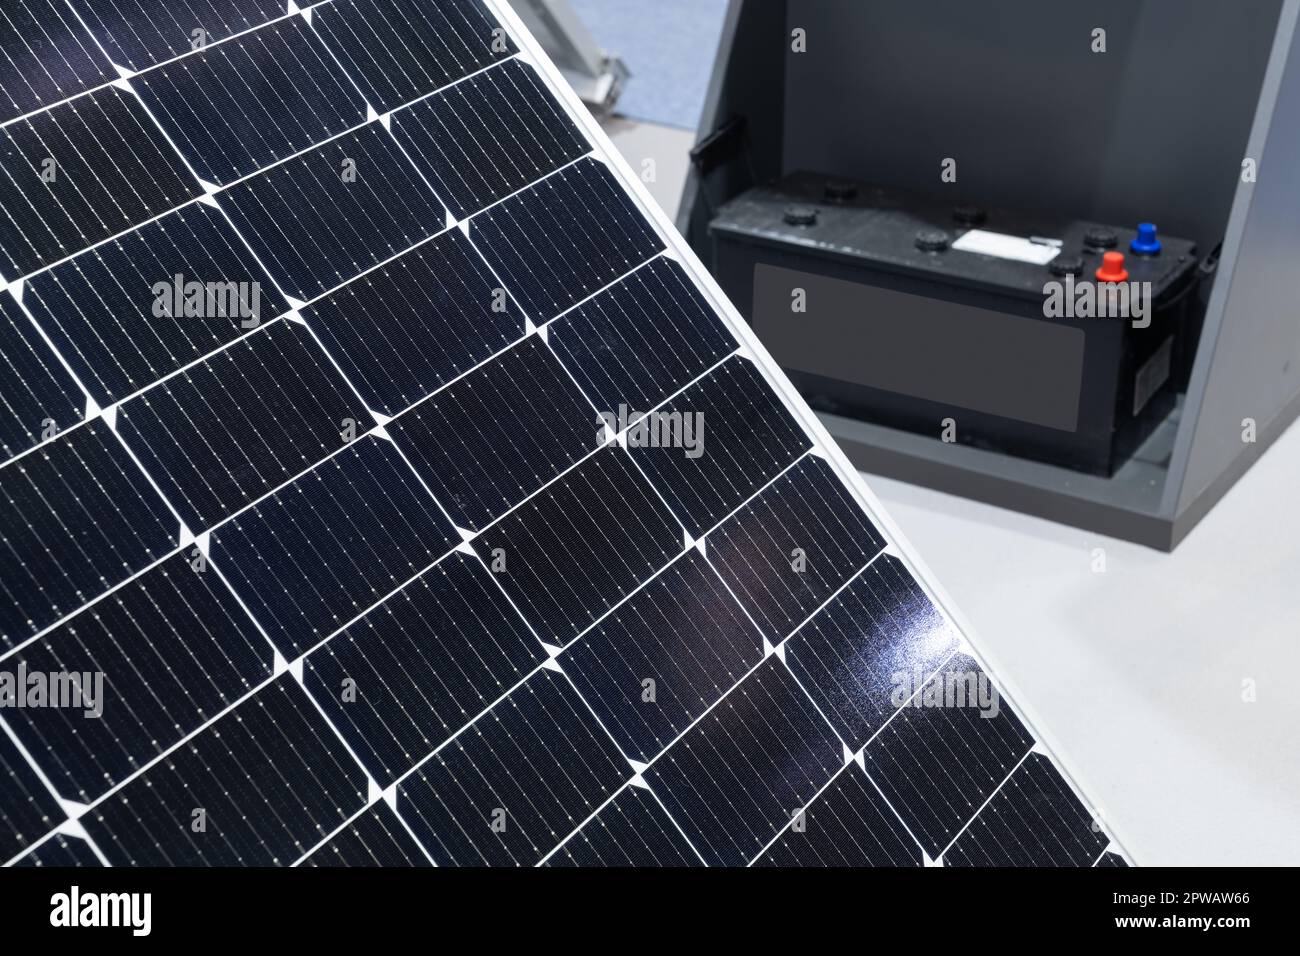 Solar panel with rechargeable batteries for energy storage. High quality photo Stock Photo